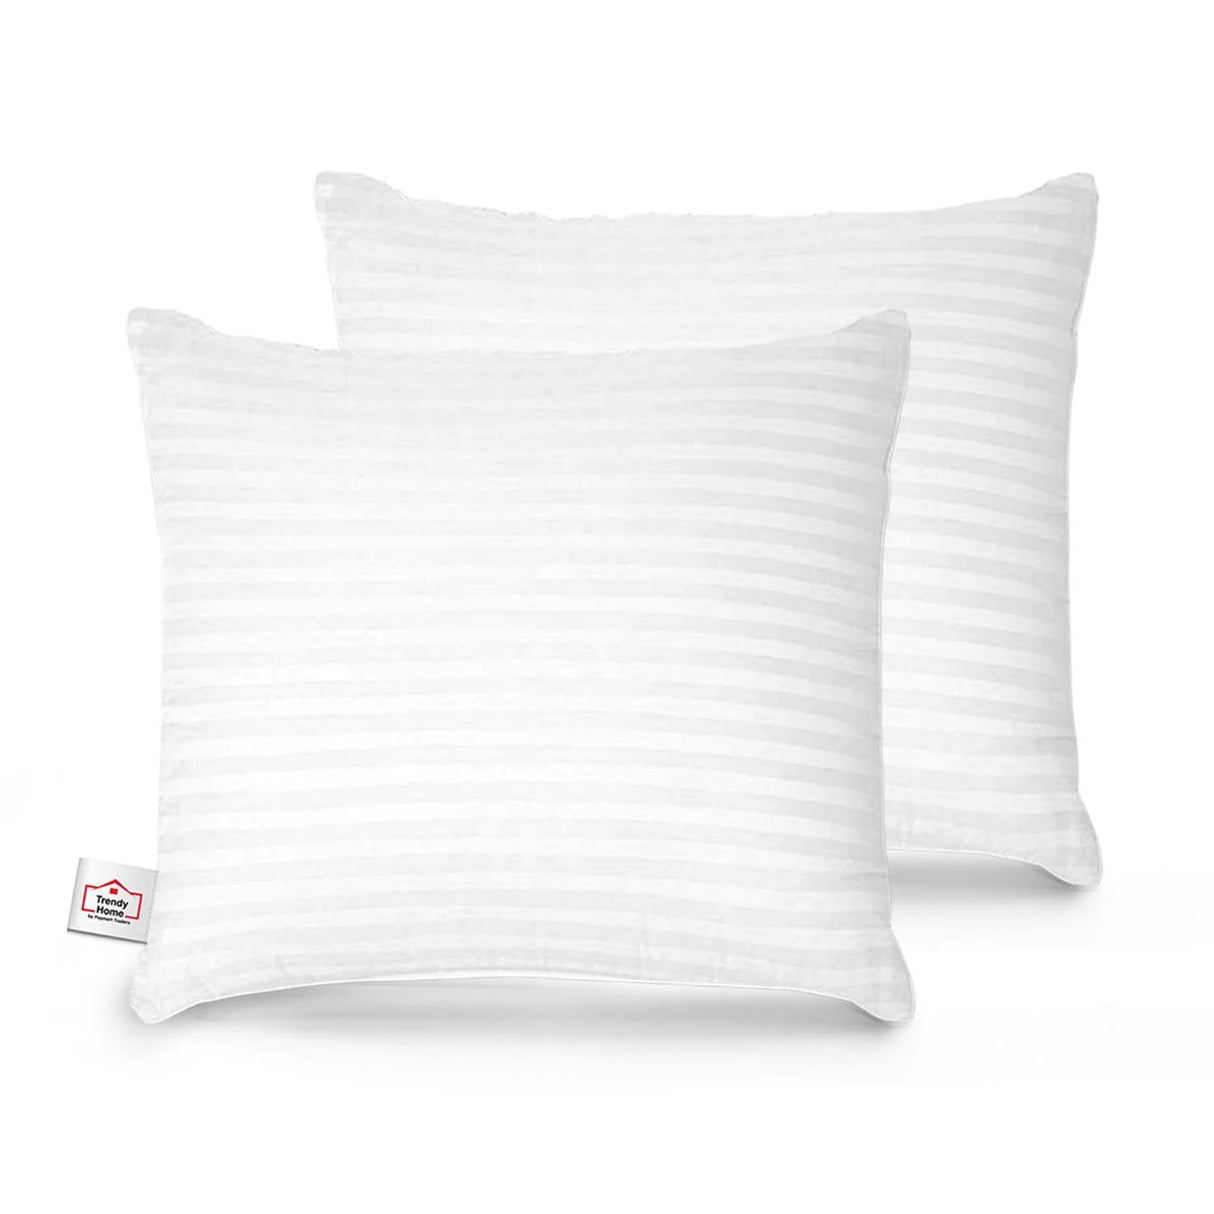 Trendy Home 12x12 Hypoallergenic Stuffer Home Office Decorative Throw Cushion Insert (White, Pack of 2)